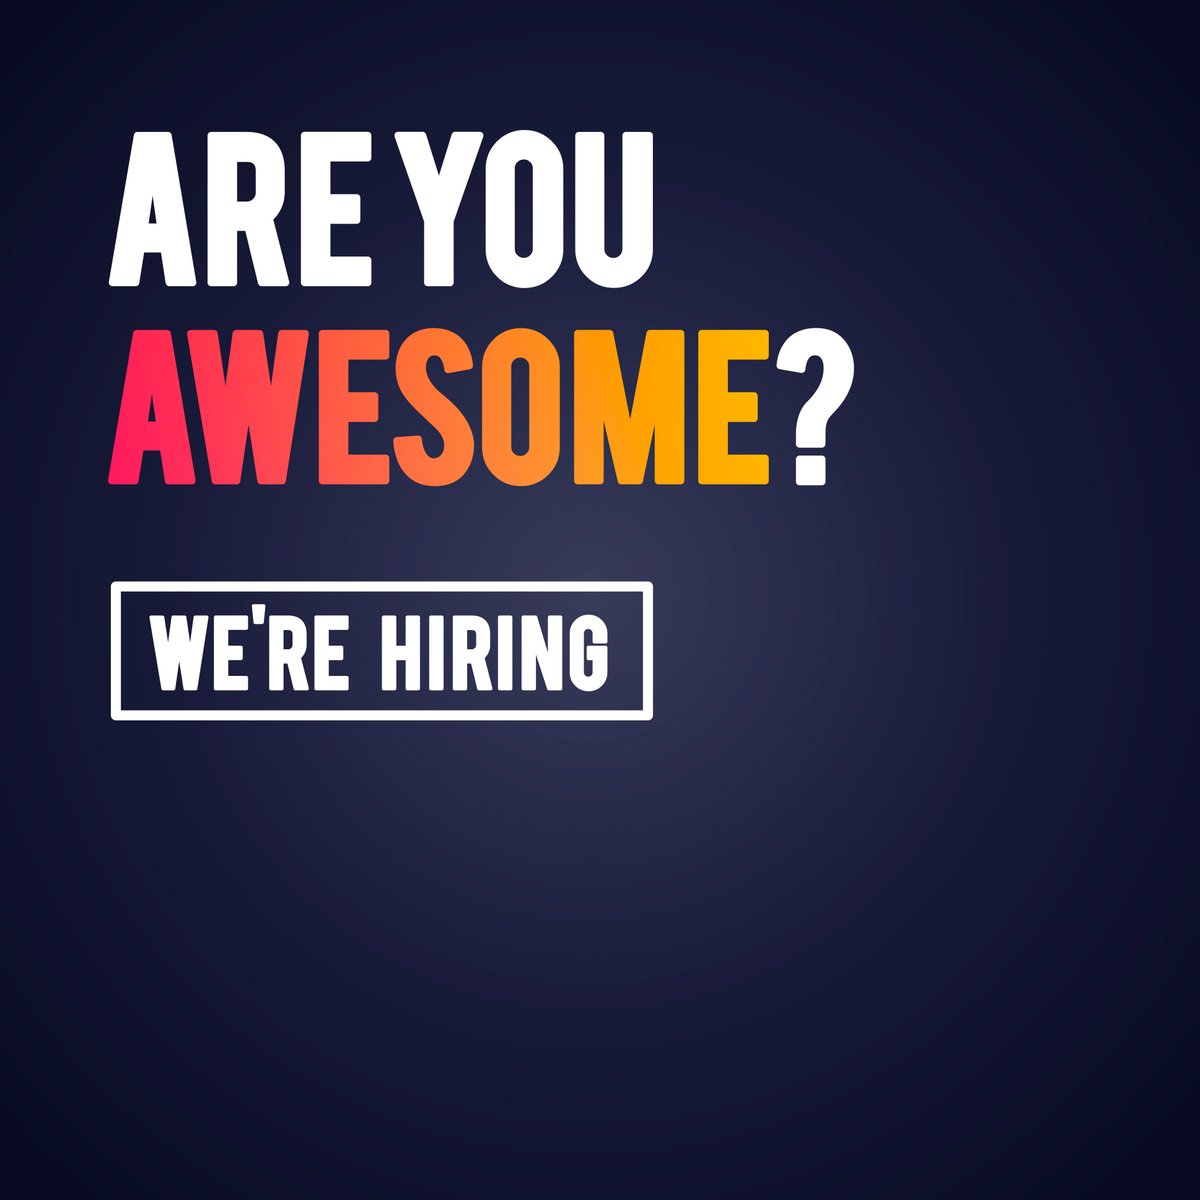 We are seeking a Tech Ops Consultant.... must be awesome and adaptable! Find out more... arcusglobal.com/news/job/techn… #jobalert #techops #recruitingnow #awesomepeople #awesomeplacetowork